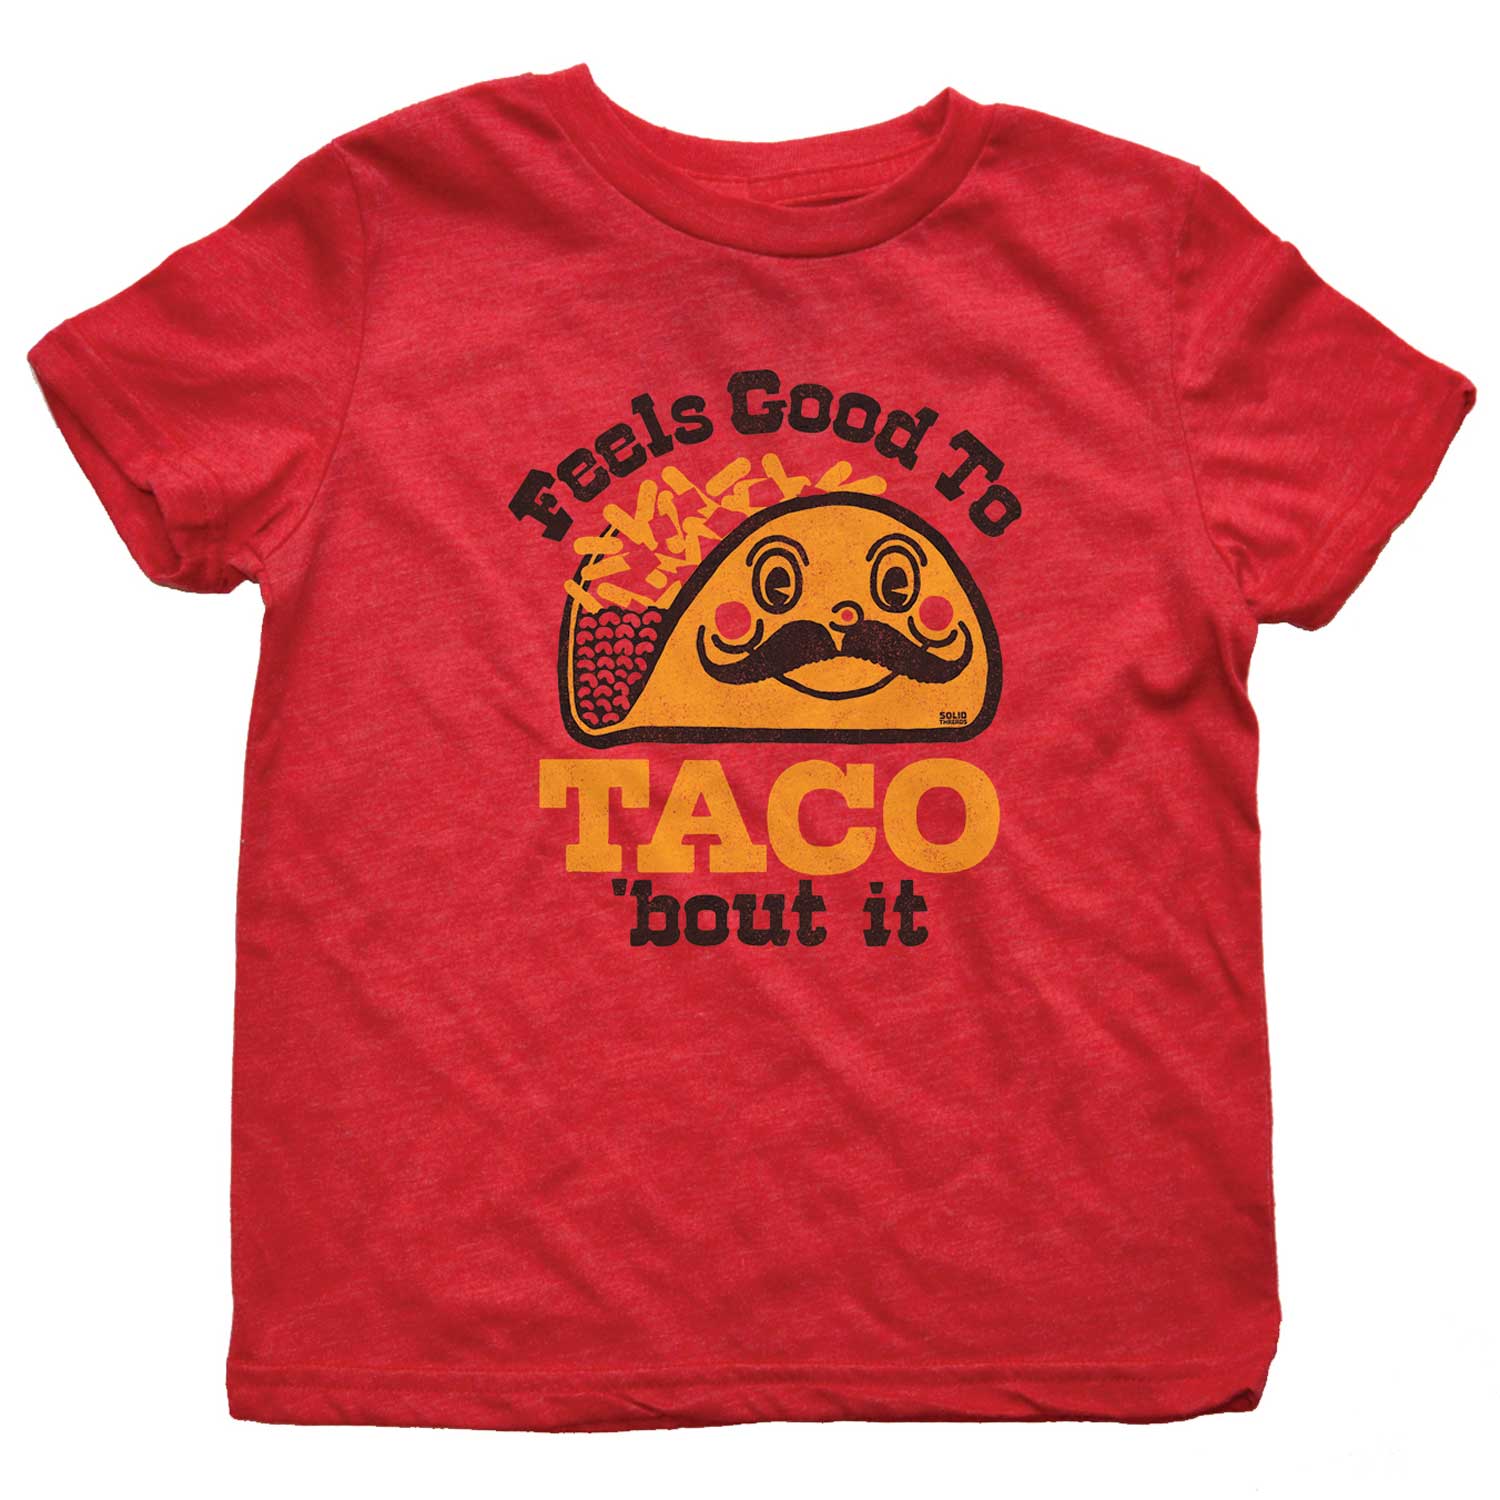 Kid's Feels Good to Taco Bout It Retro Graphic Tee | Funny Food T-shirt for Youth | Solid Threads